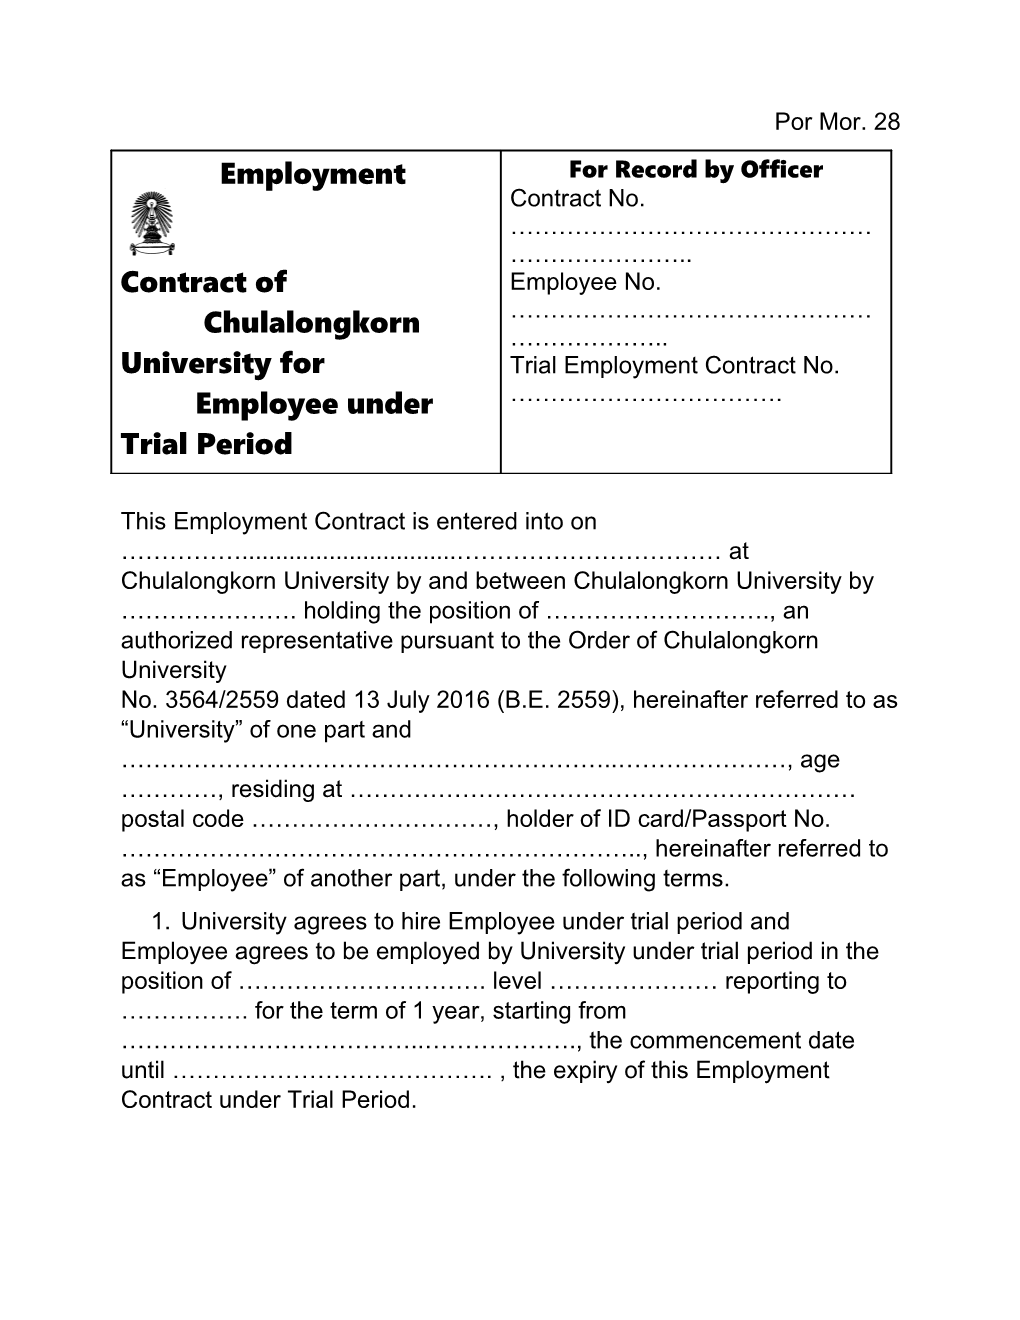 This Employment Contract Is Entered Into on at Chulalongkorn University by and Between